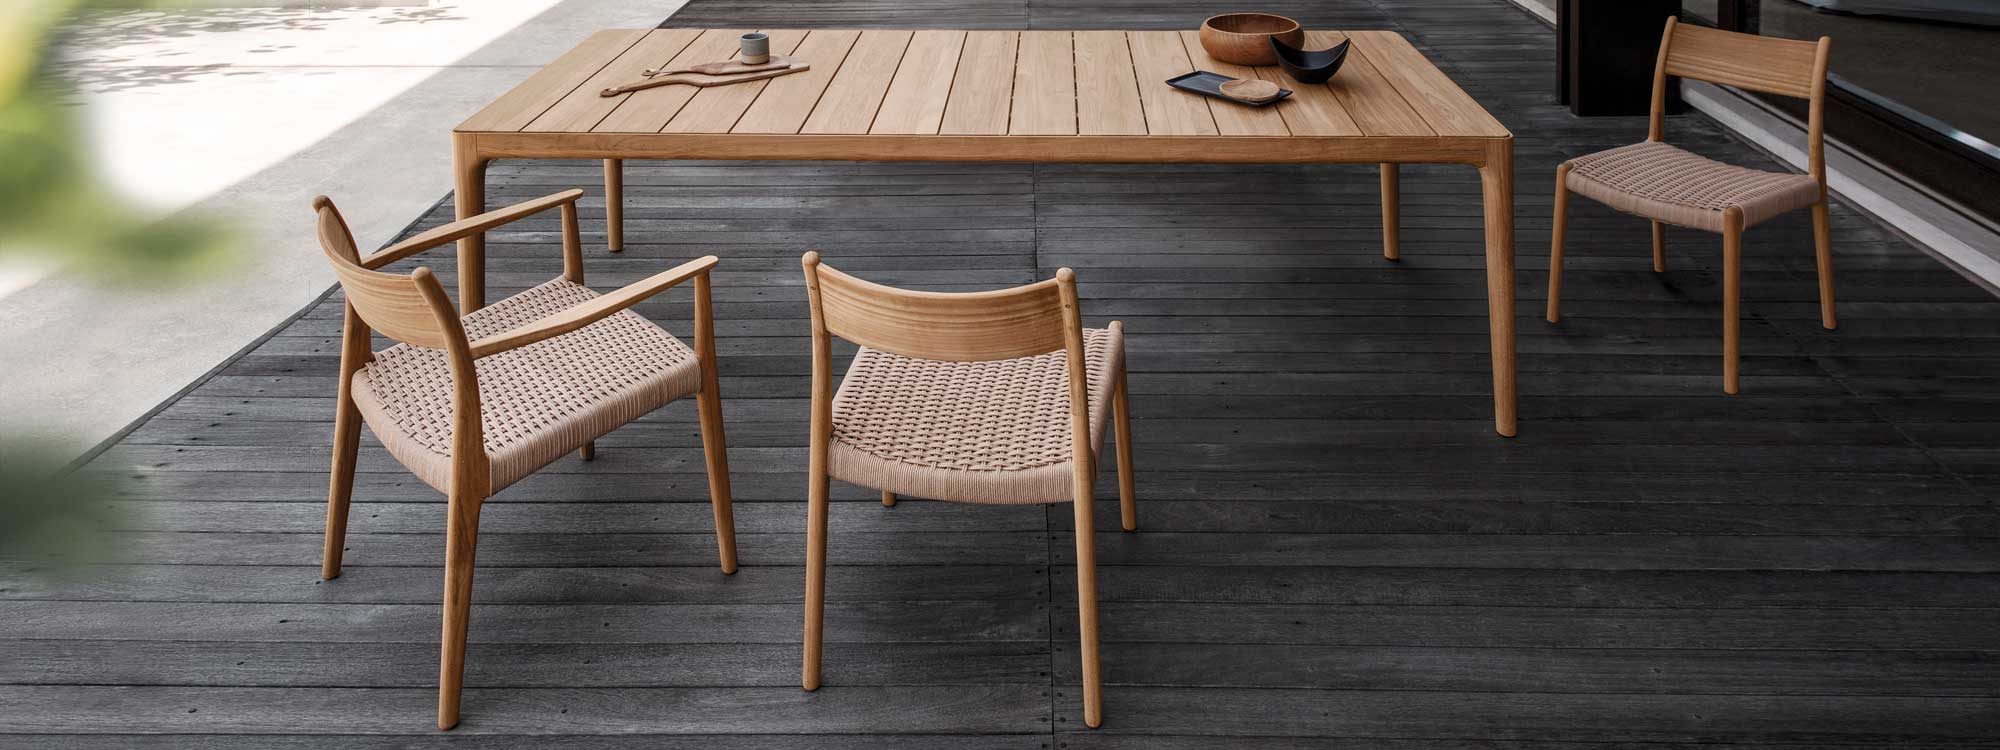 Image of Gloster Lima teak dining furniture with elegant hand-woven wicker seats